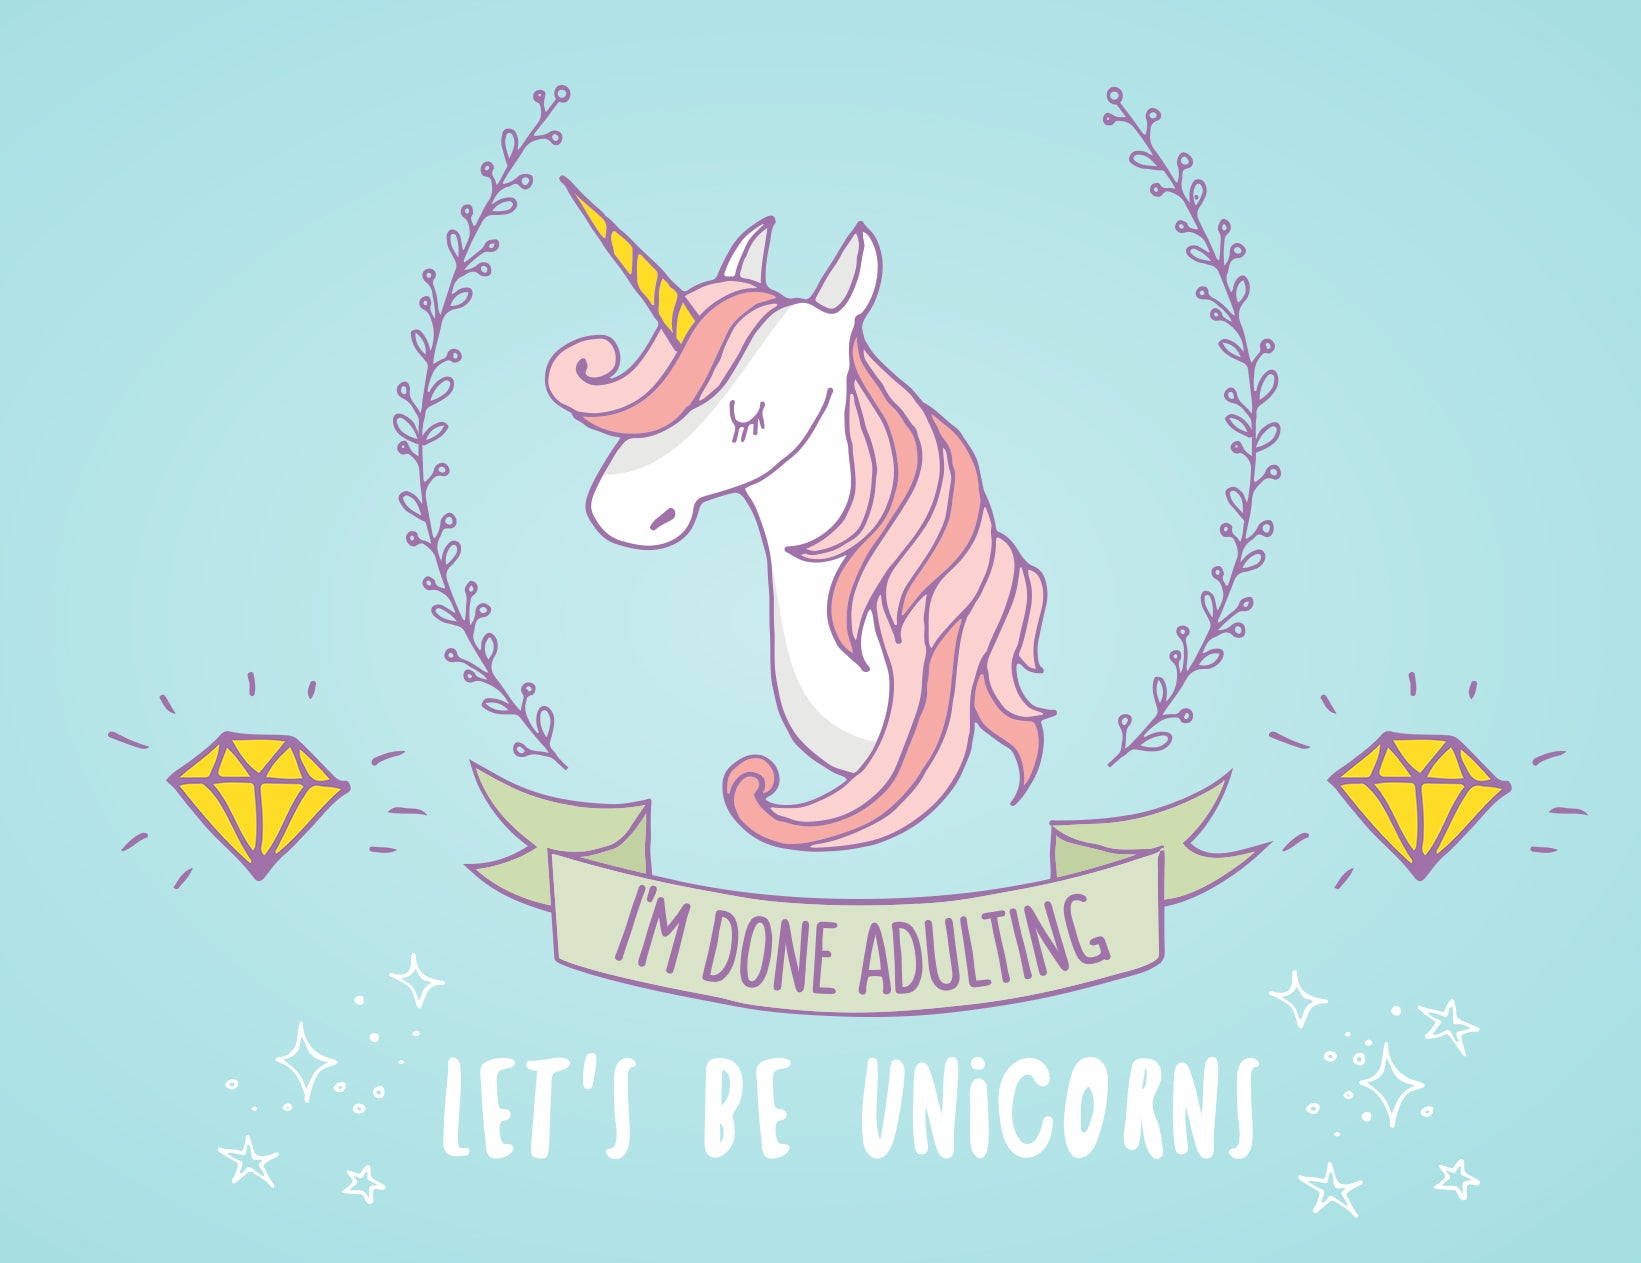 Adulting Is Hard Let's Be Unicorns Card